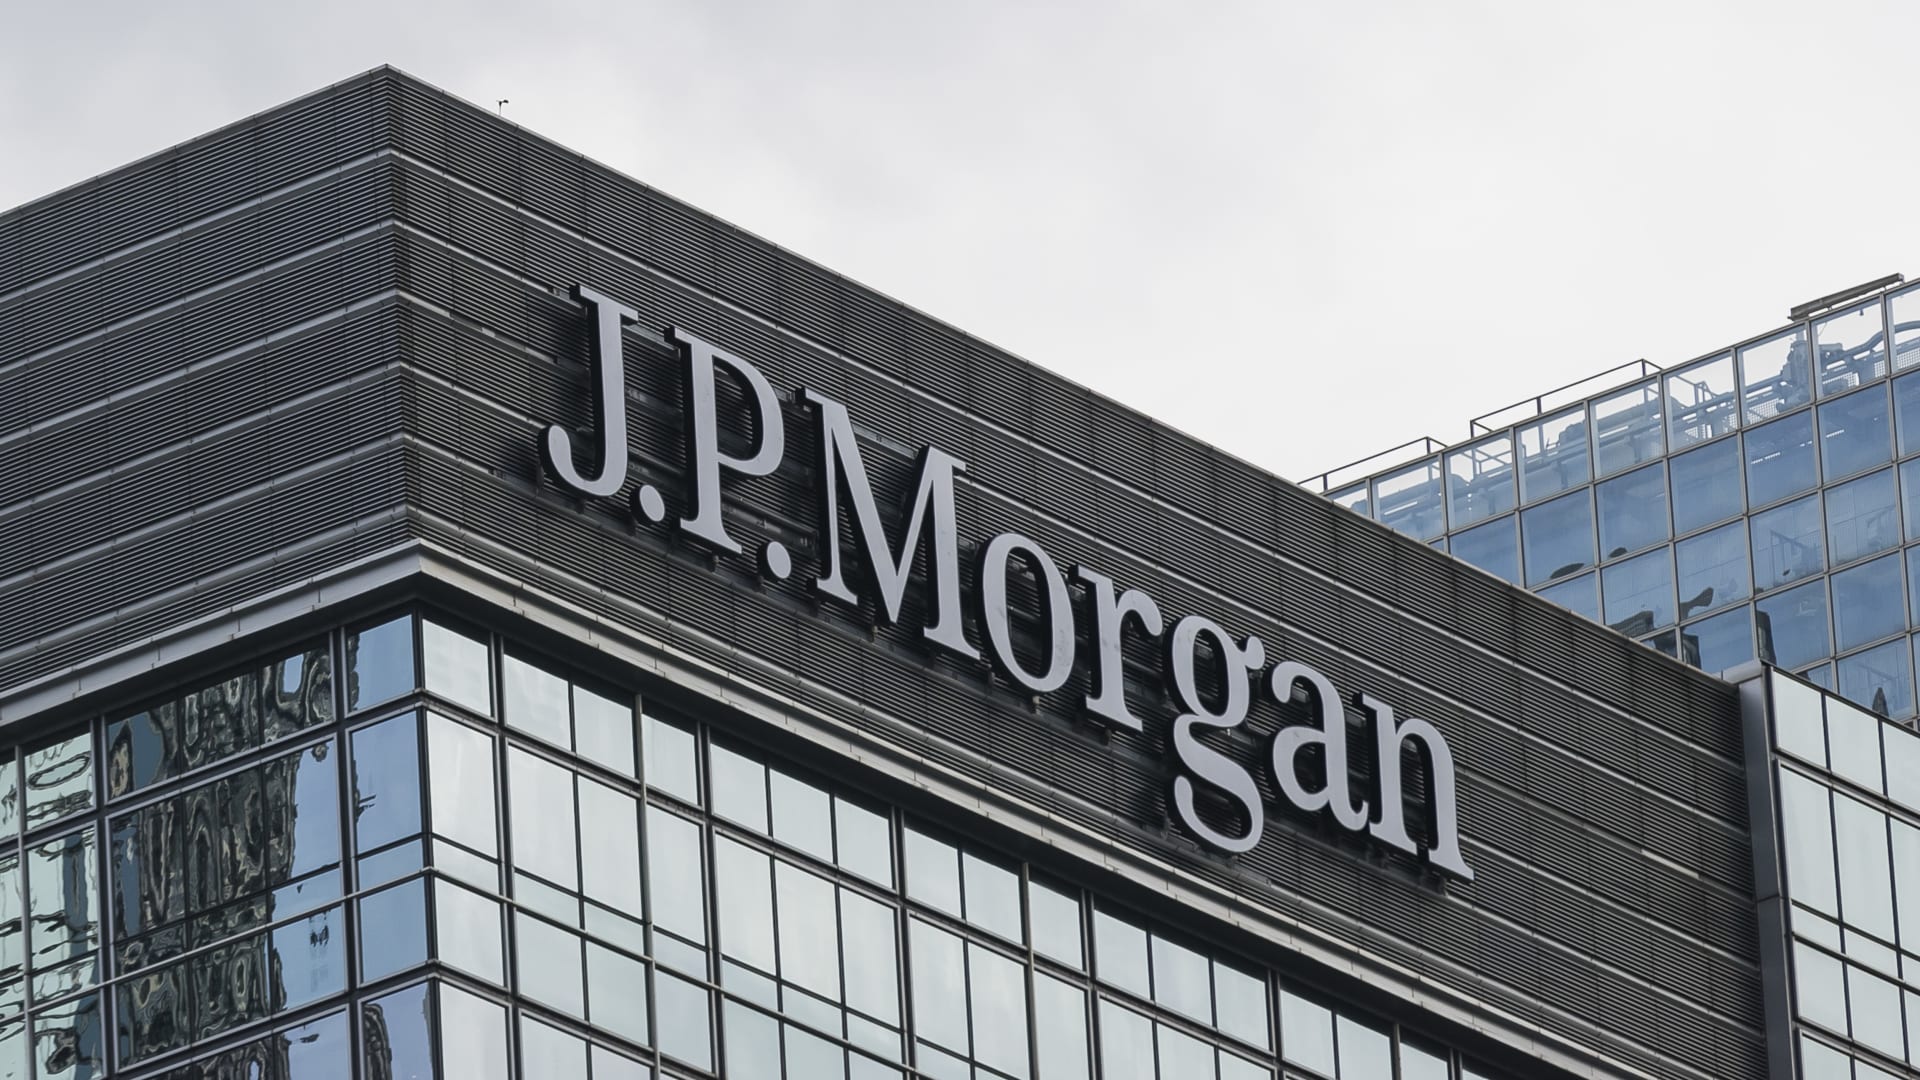 JPMorgan agrees to purchase $200 million worth of carbon removal